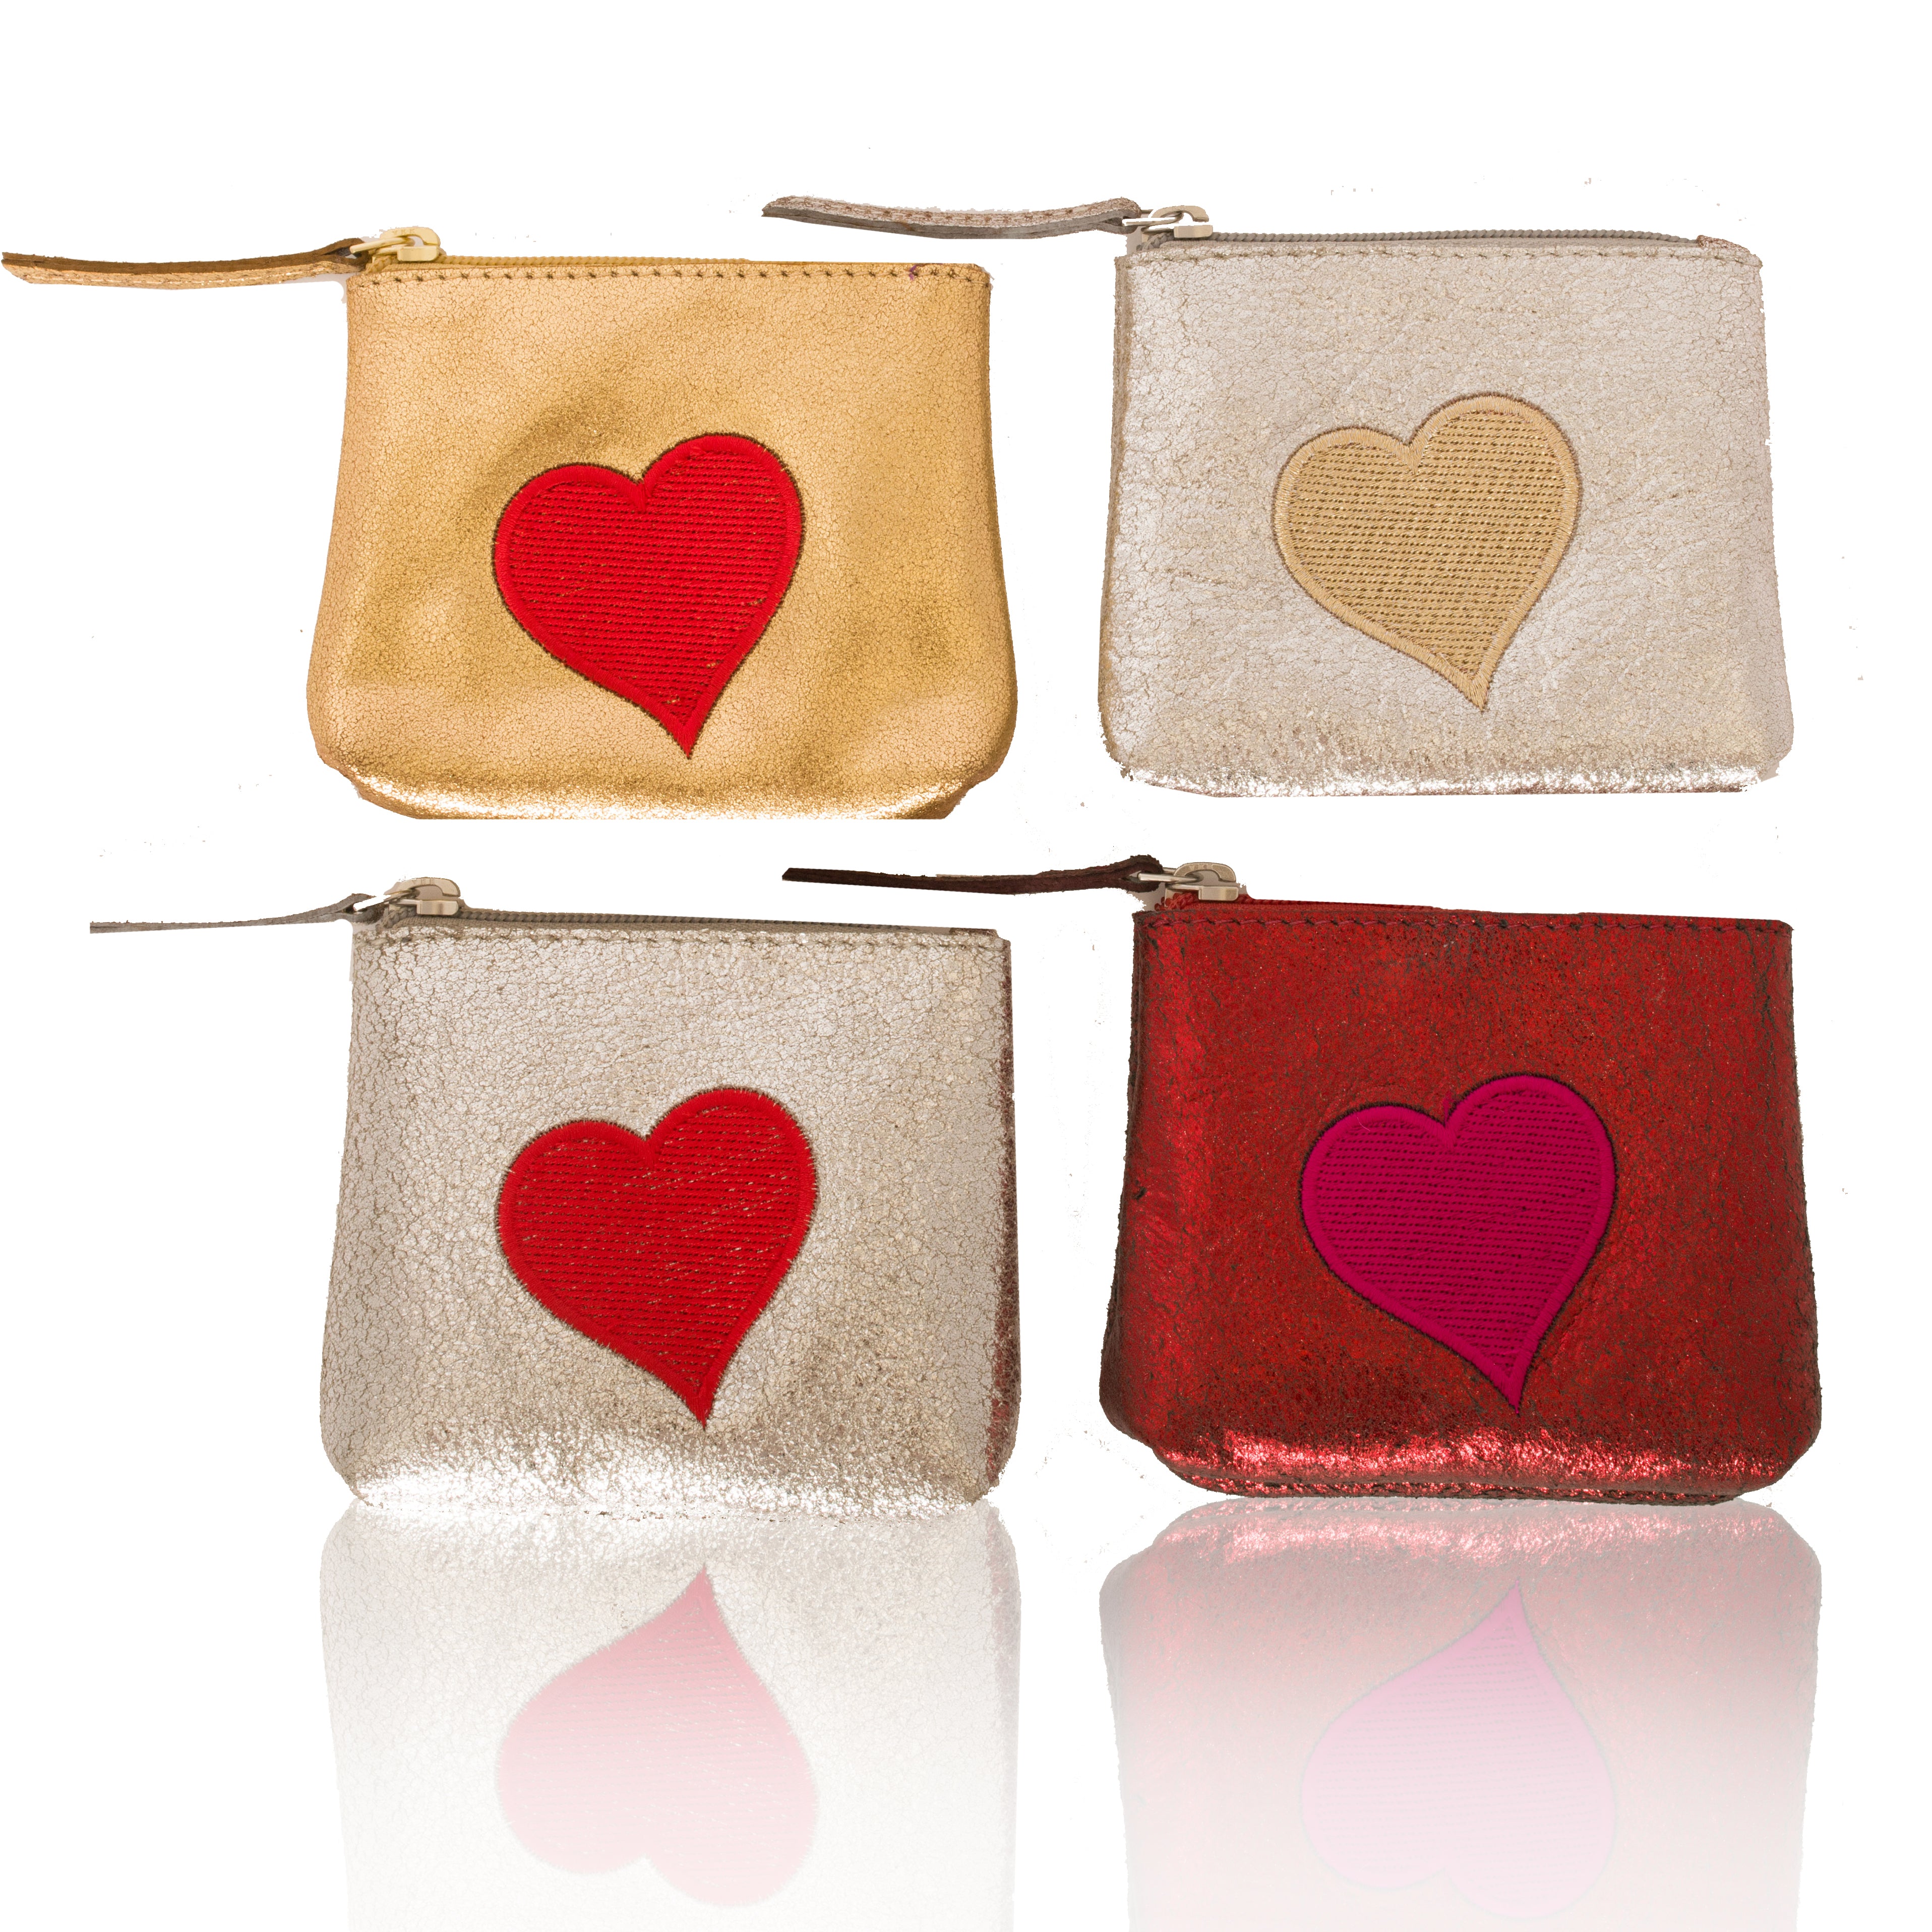 Leather Heart Coin Purse